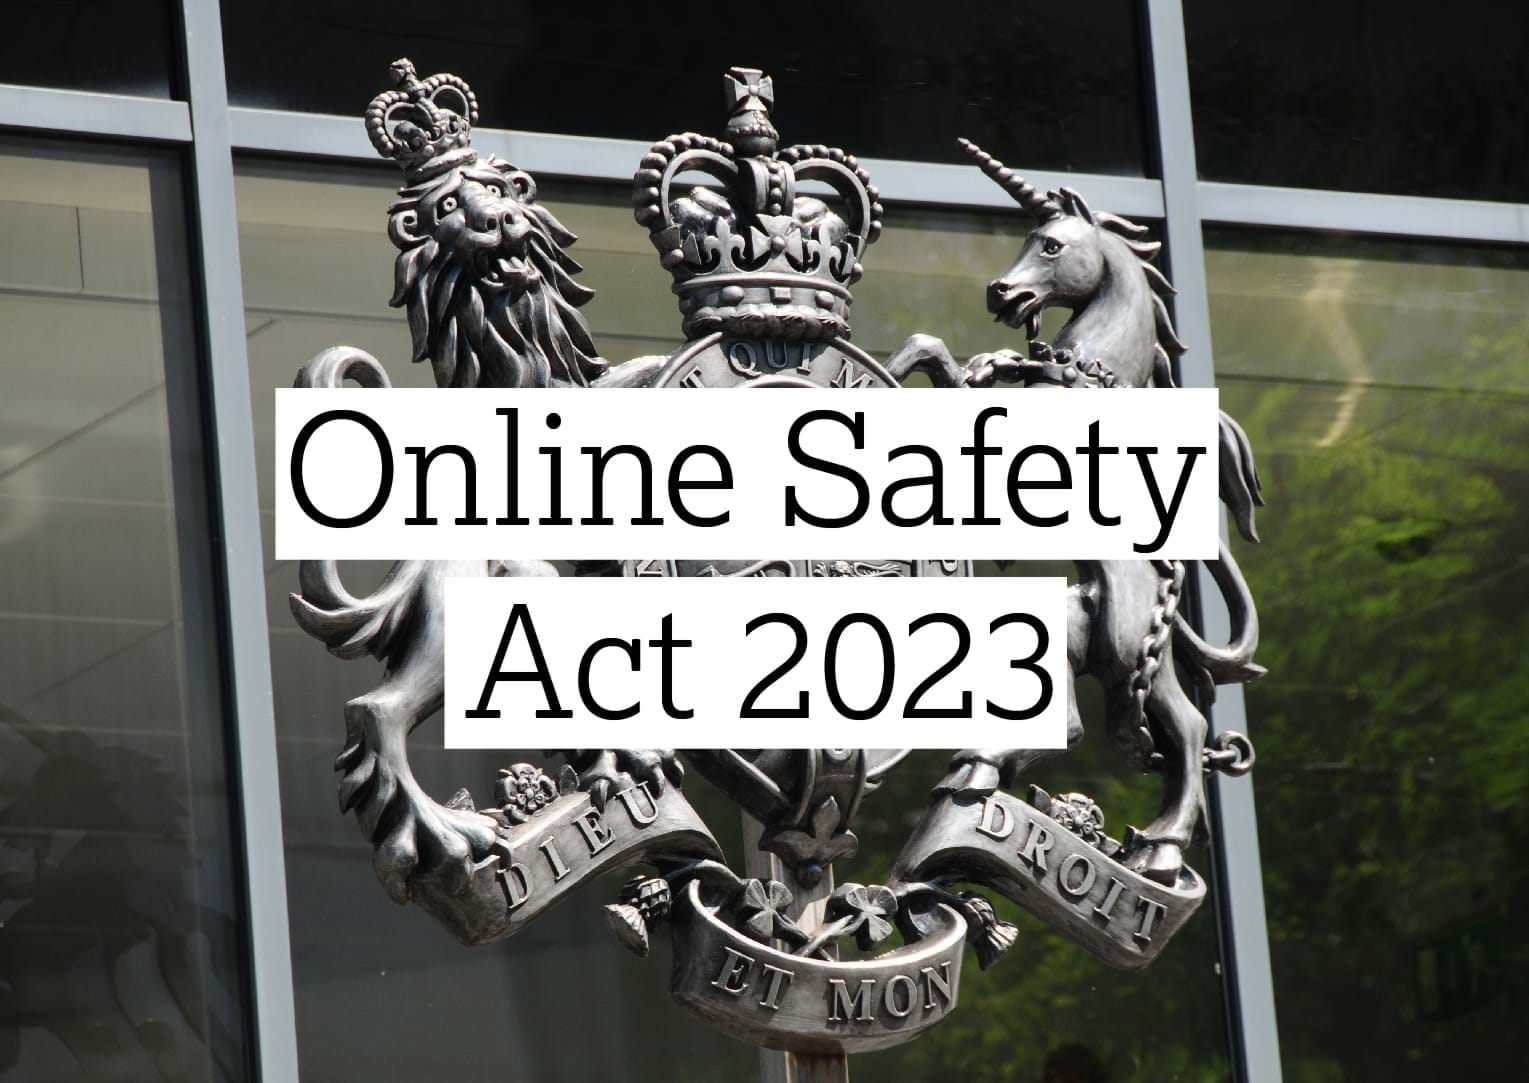 Online Safety Act 